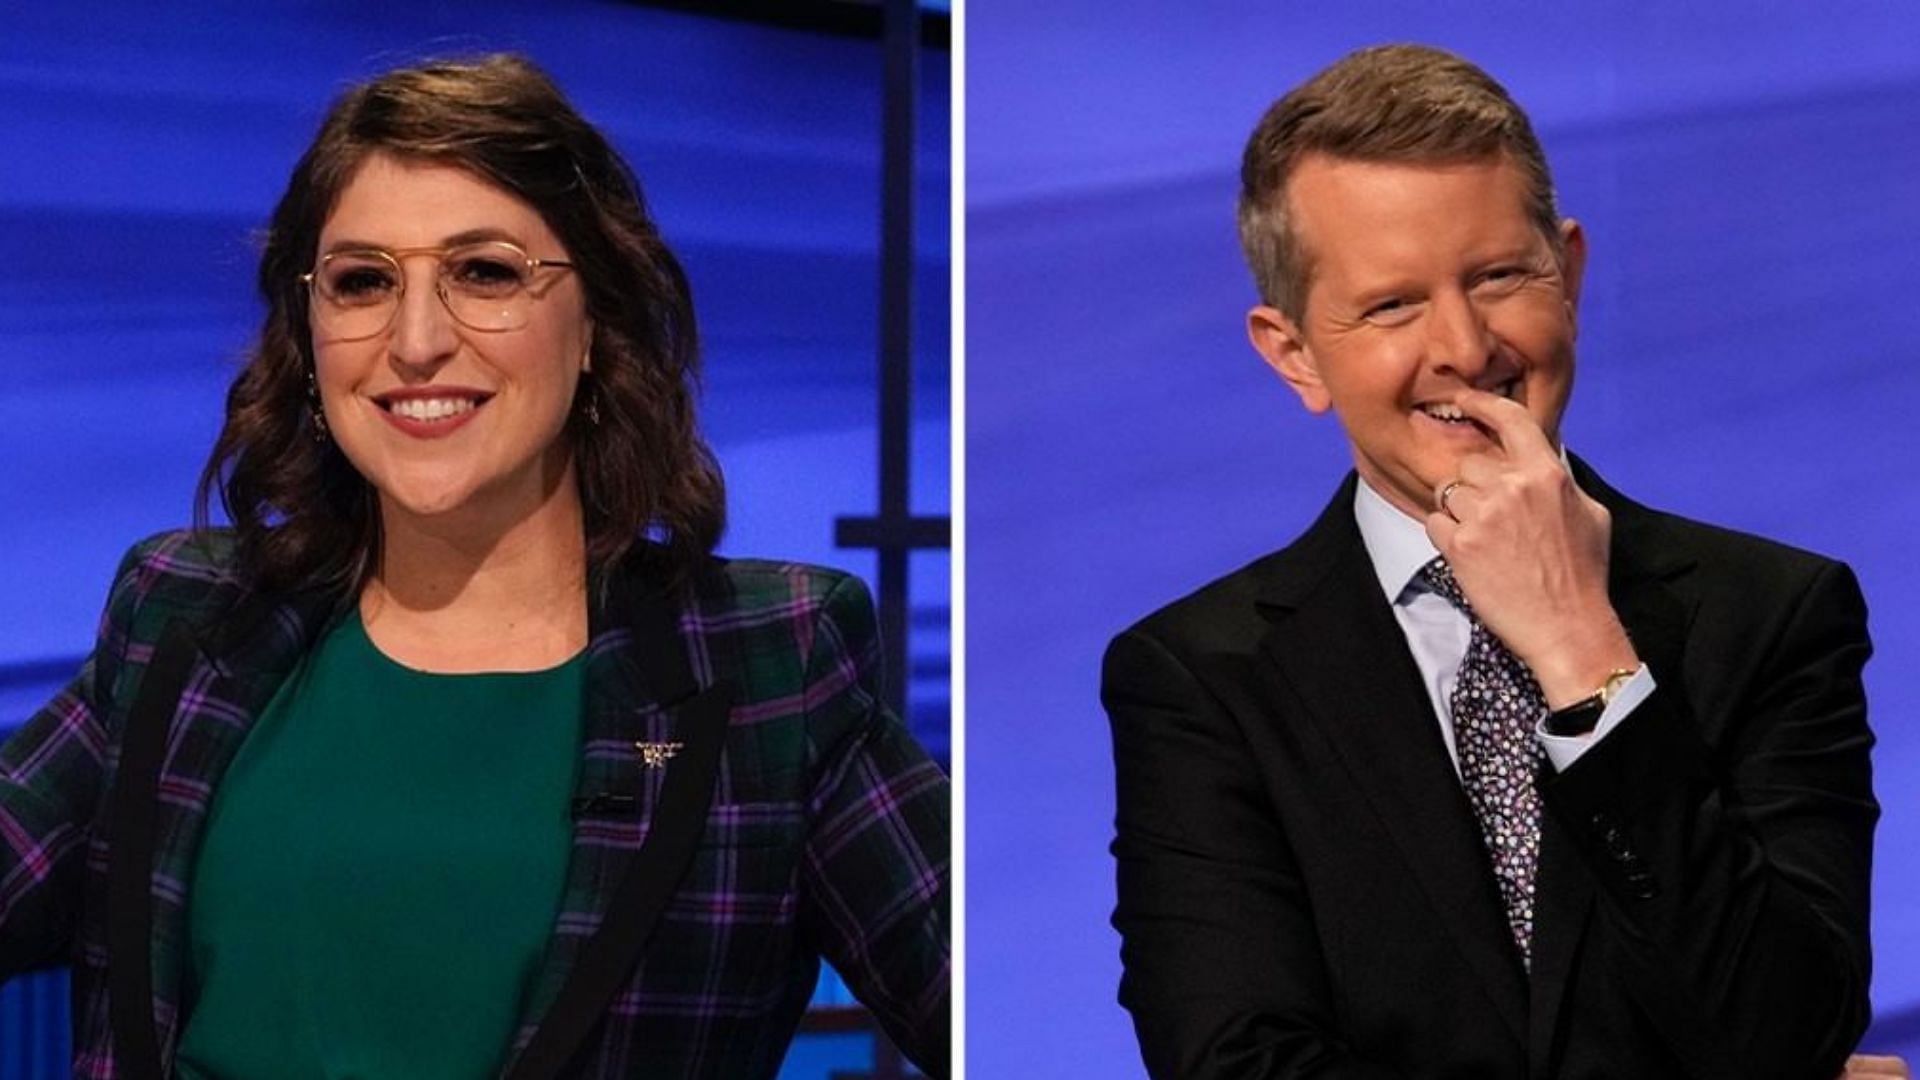 Mayim Bialik and Ken Jennings are currently sharing hosting duties on Jeopardy! (Image via jeopardy/ Instagram)